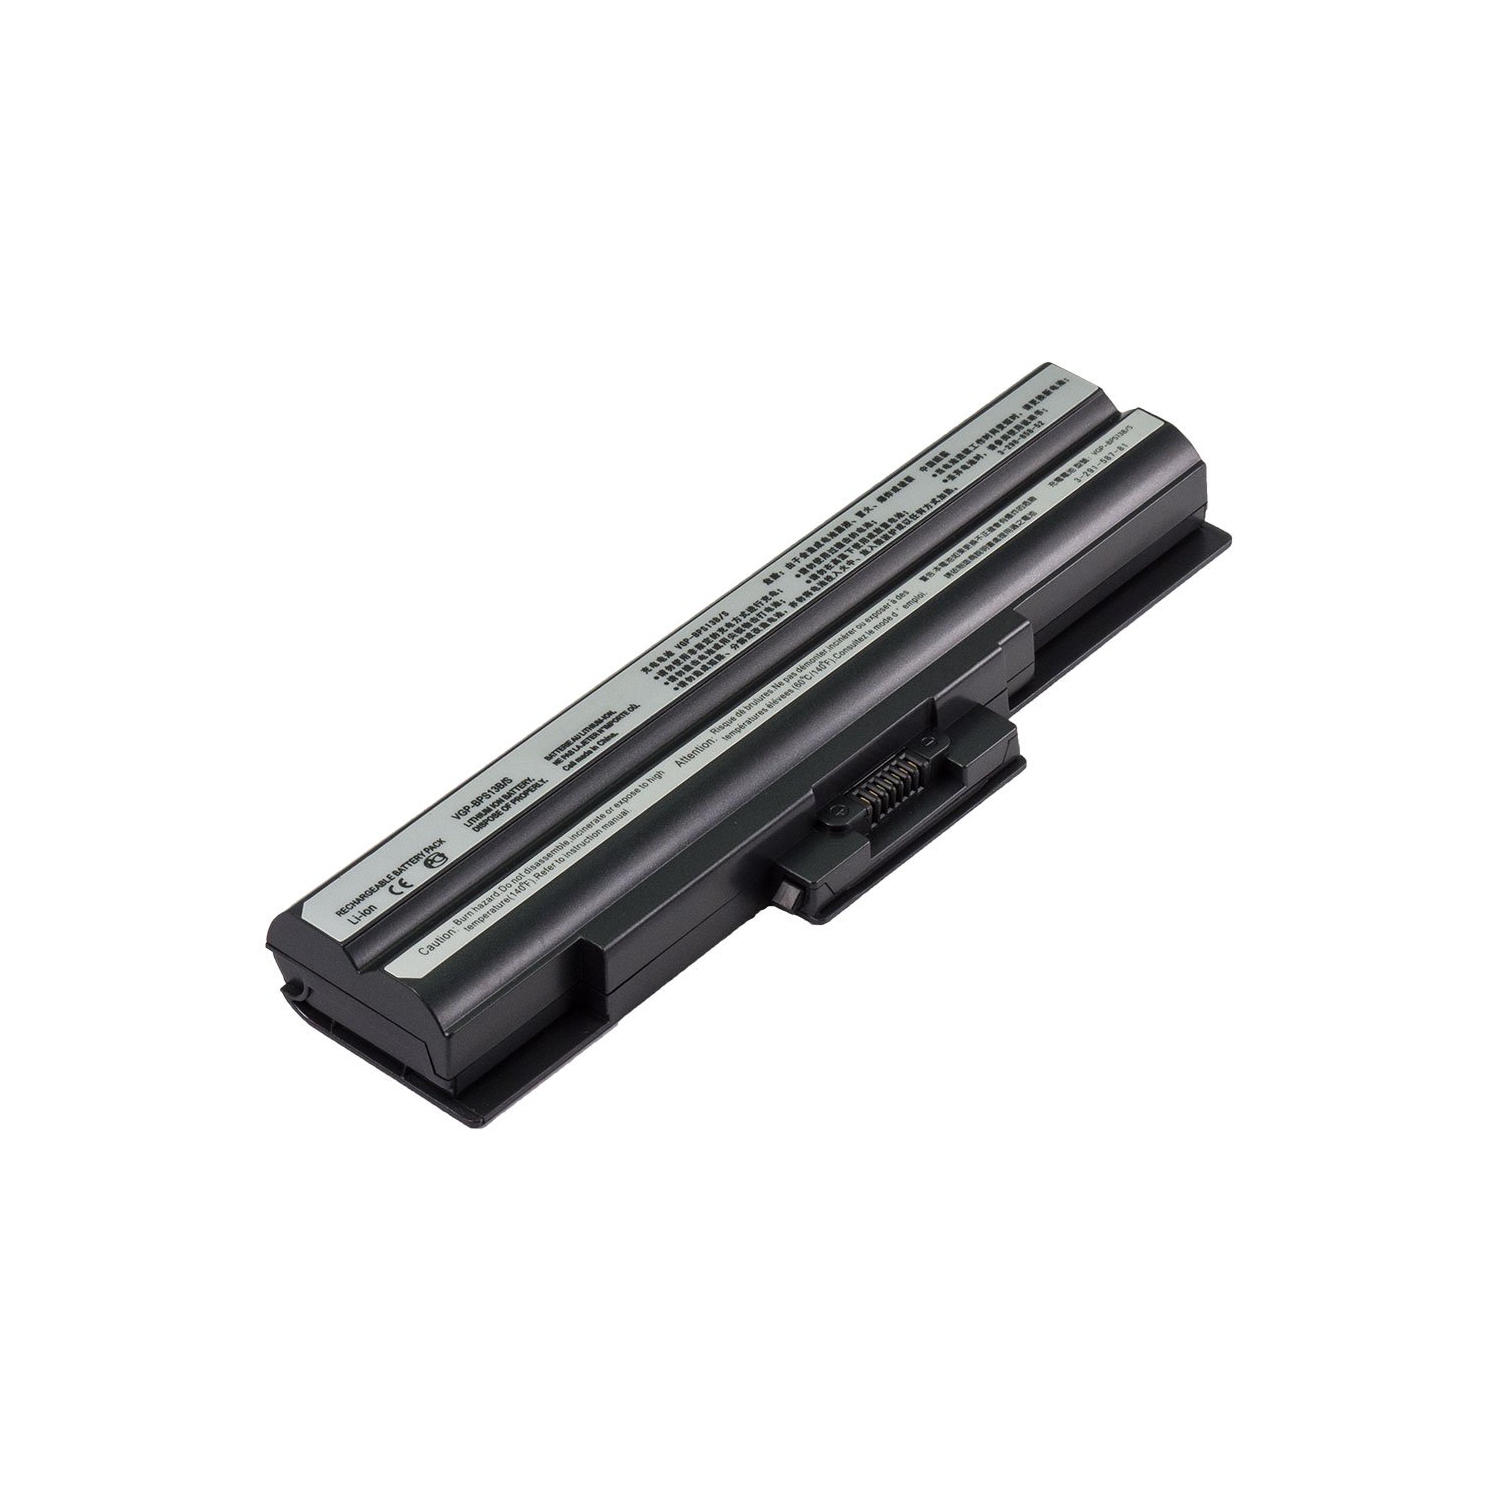 Laptop Battery Replacement for Sony VAIO VGN-CS115J/P, VGP-BPL13, VGP-BPS13/Q, VGP-BPS13A/B, VGP-BPS13A/S, VGP-BPS13A